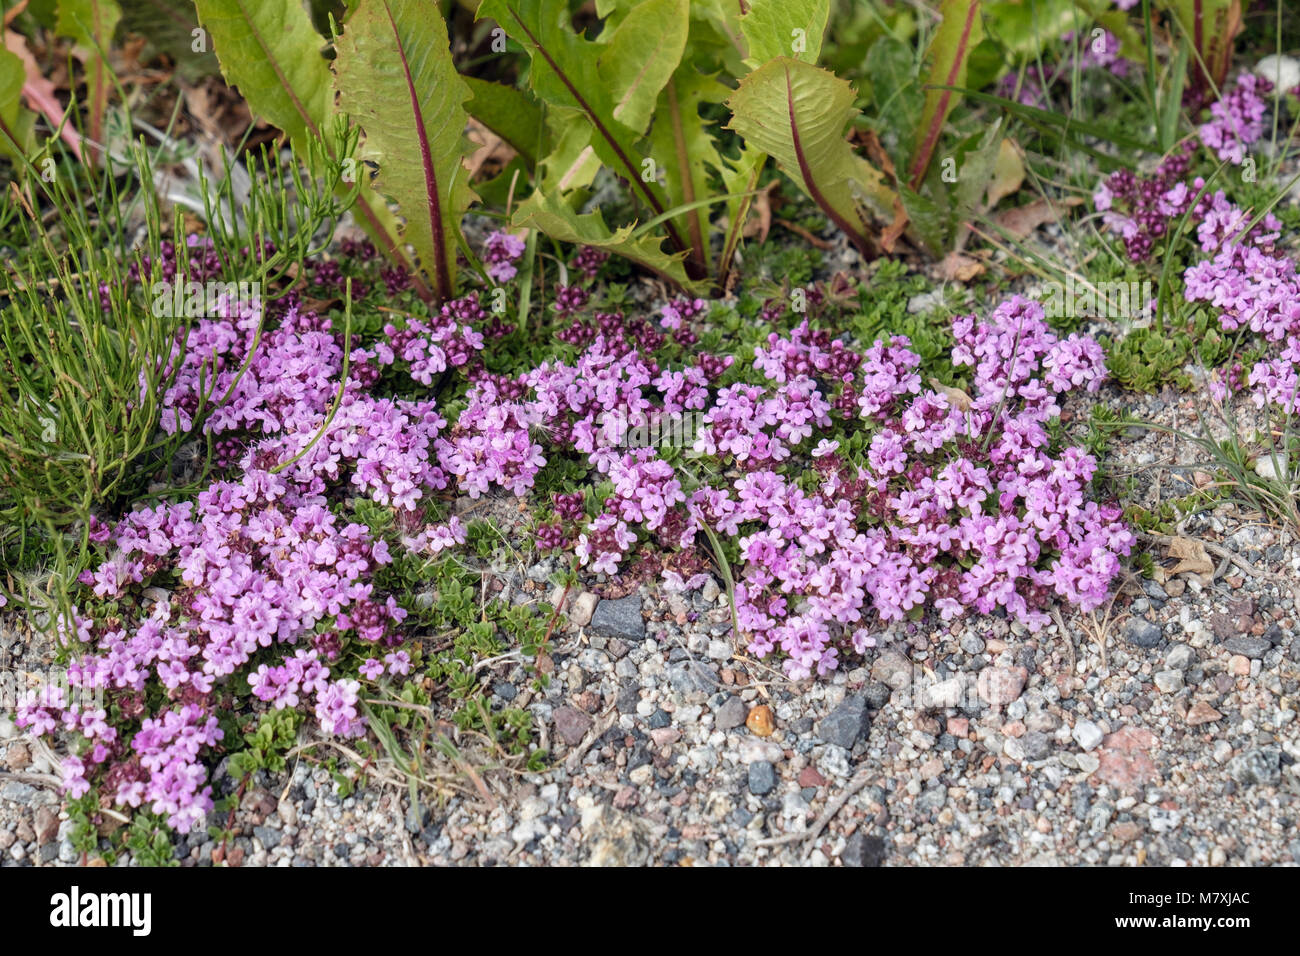 Wild Thyme (Thymus polytrichus) flowers growing in stony tundra habitat in summer. Narsaq, Kujalleq, South Greenland Stock Photo